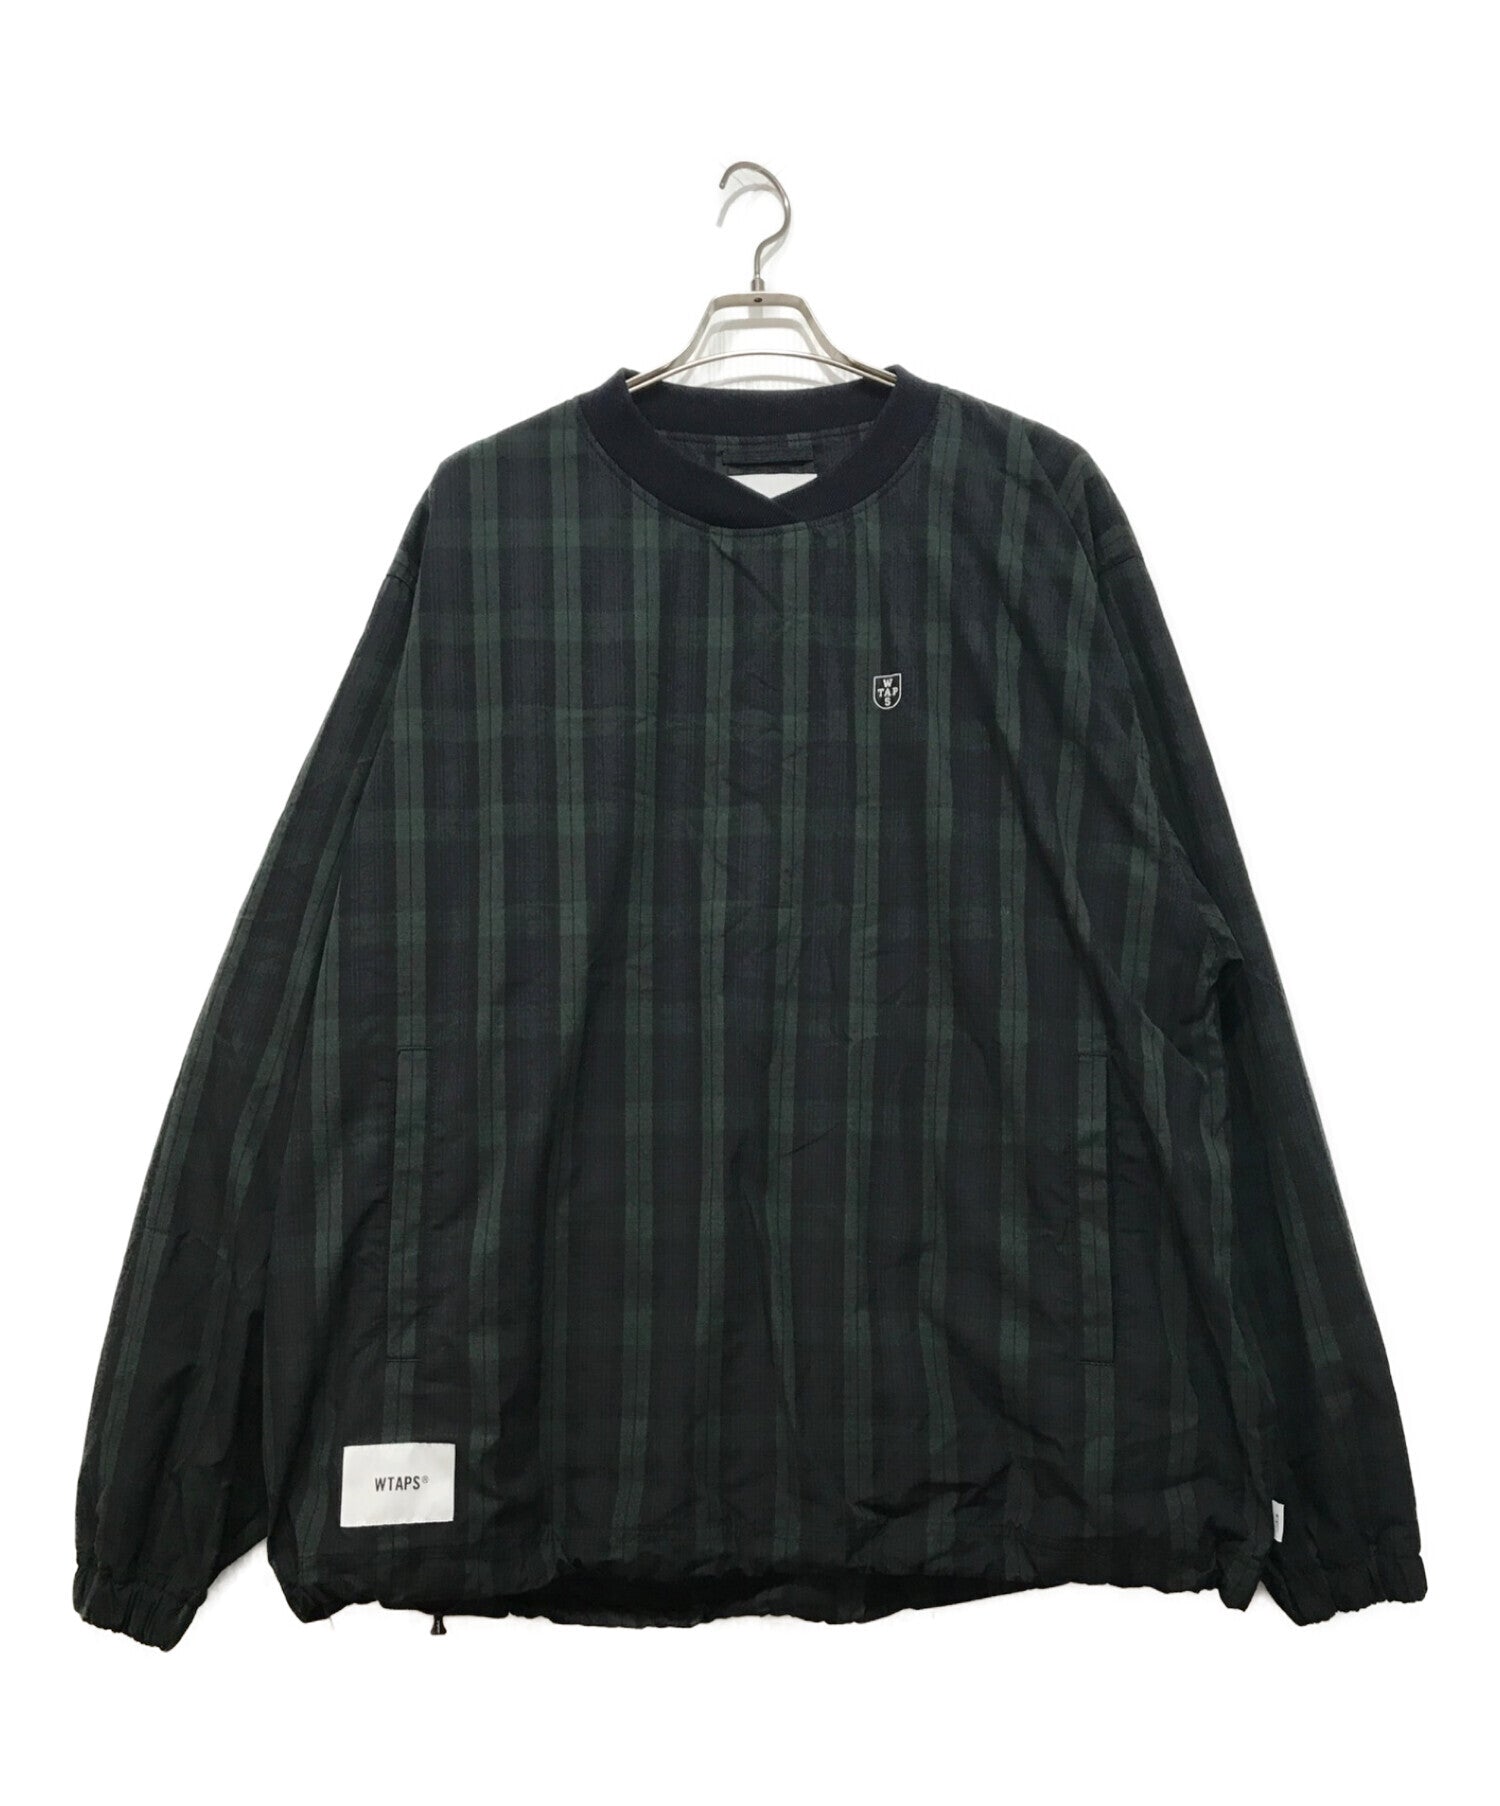 WTAPS check pullover 222tqdt-jkm03 | Archive Factory